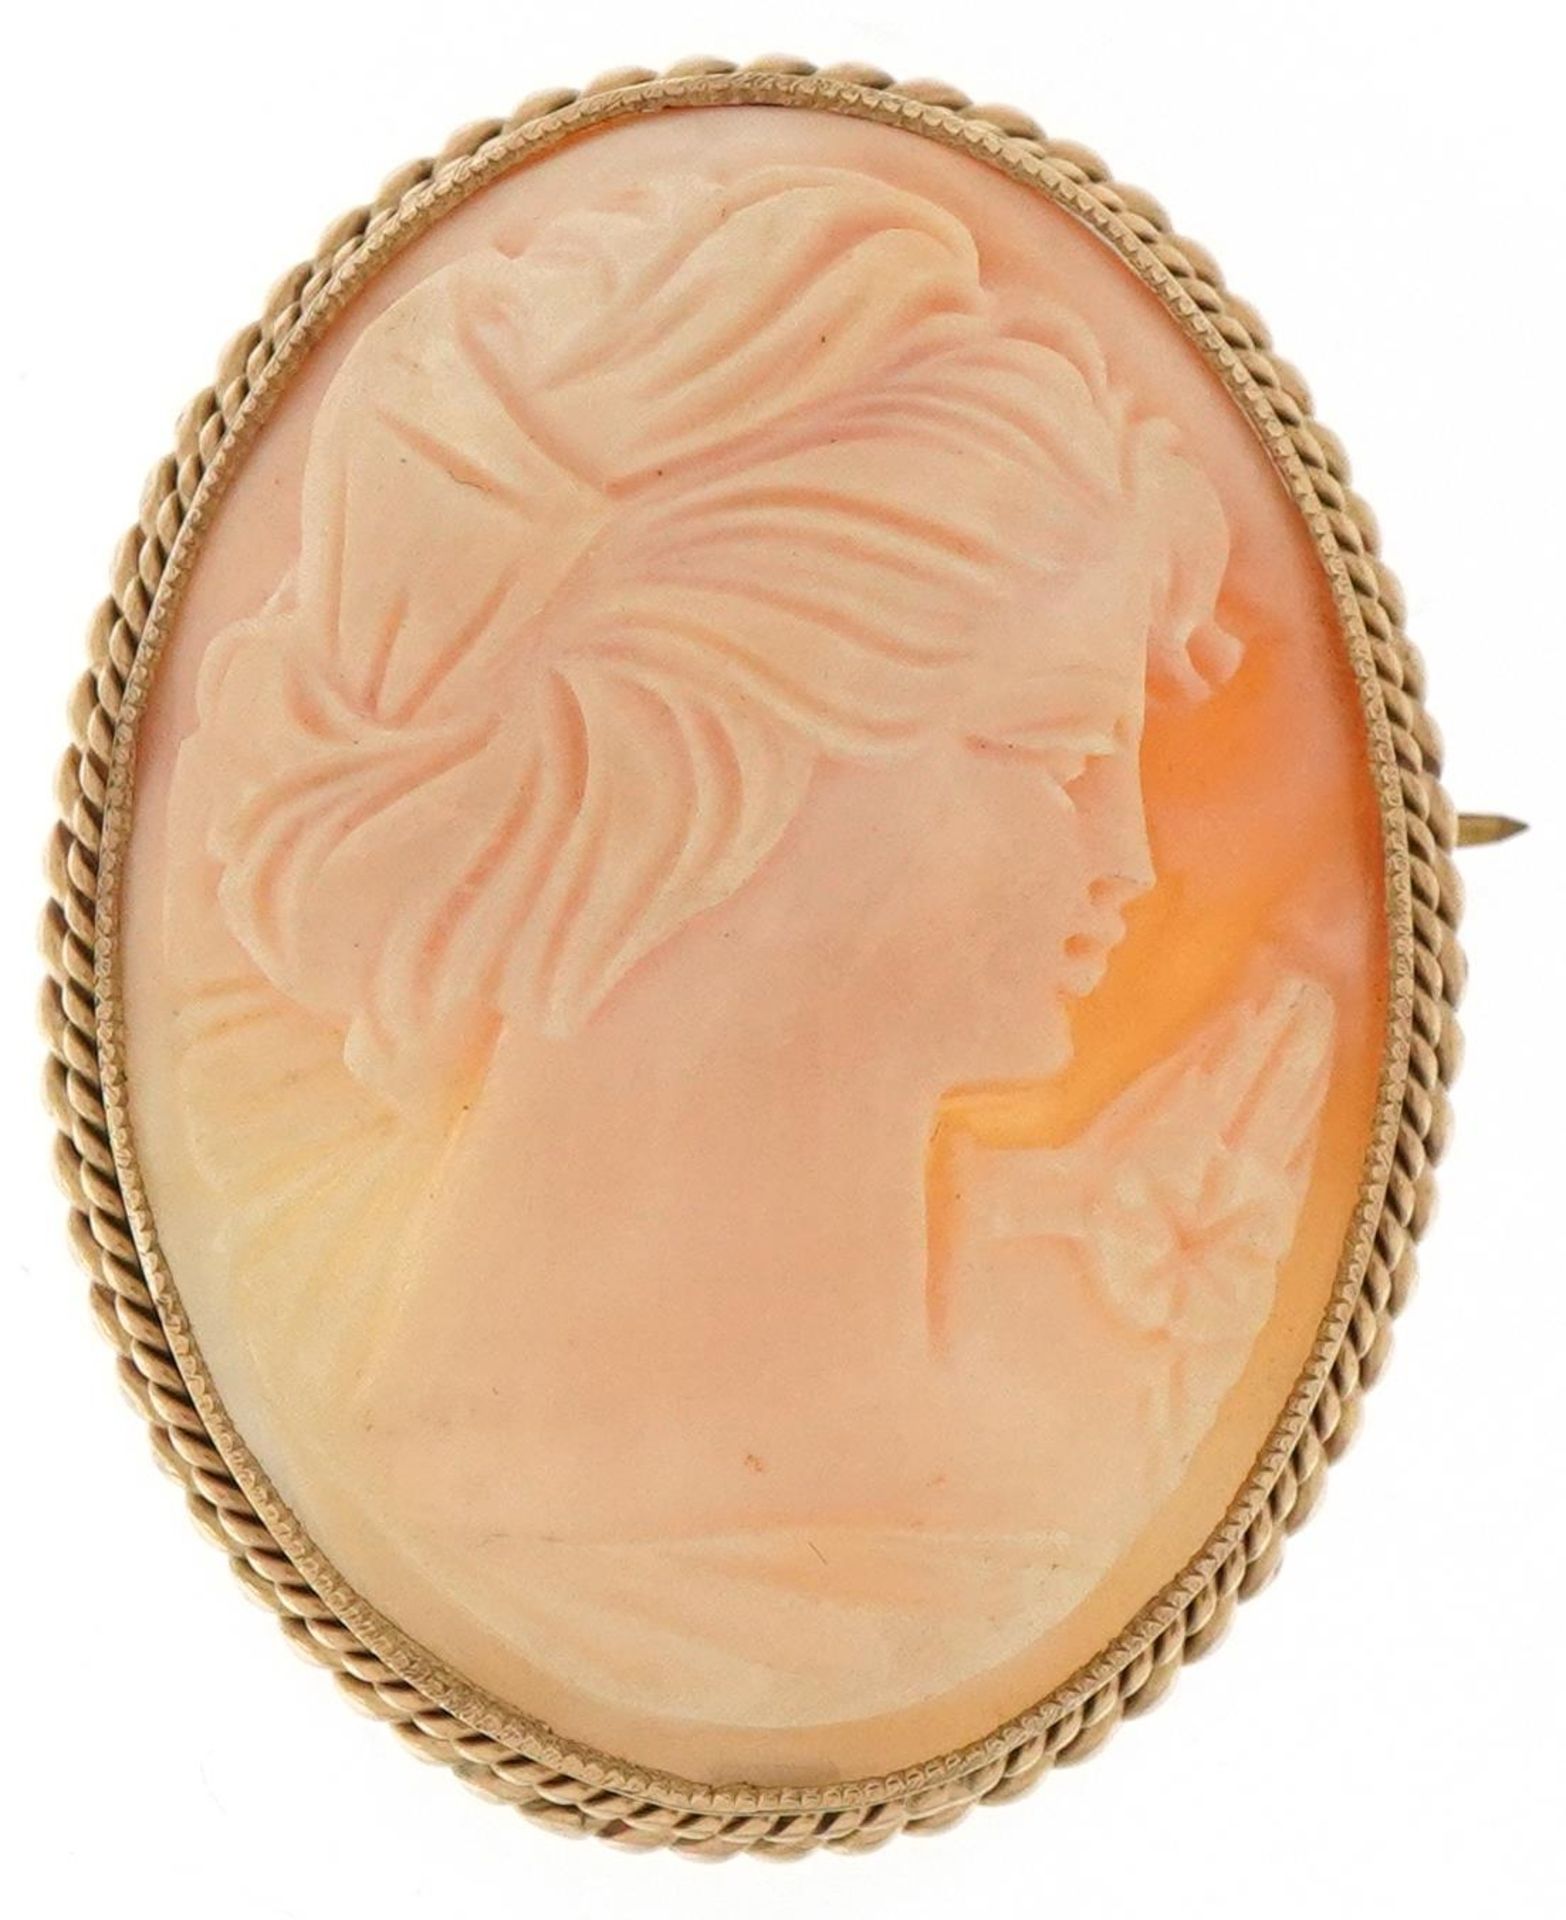 9ct gold mounted cameo shell pendant carved with a maiden head, 3.8cm high, 9.6g